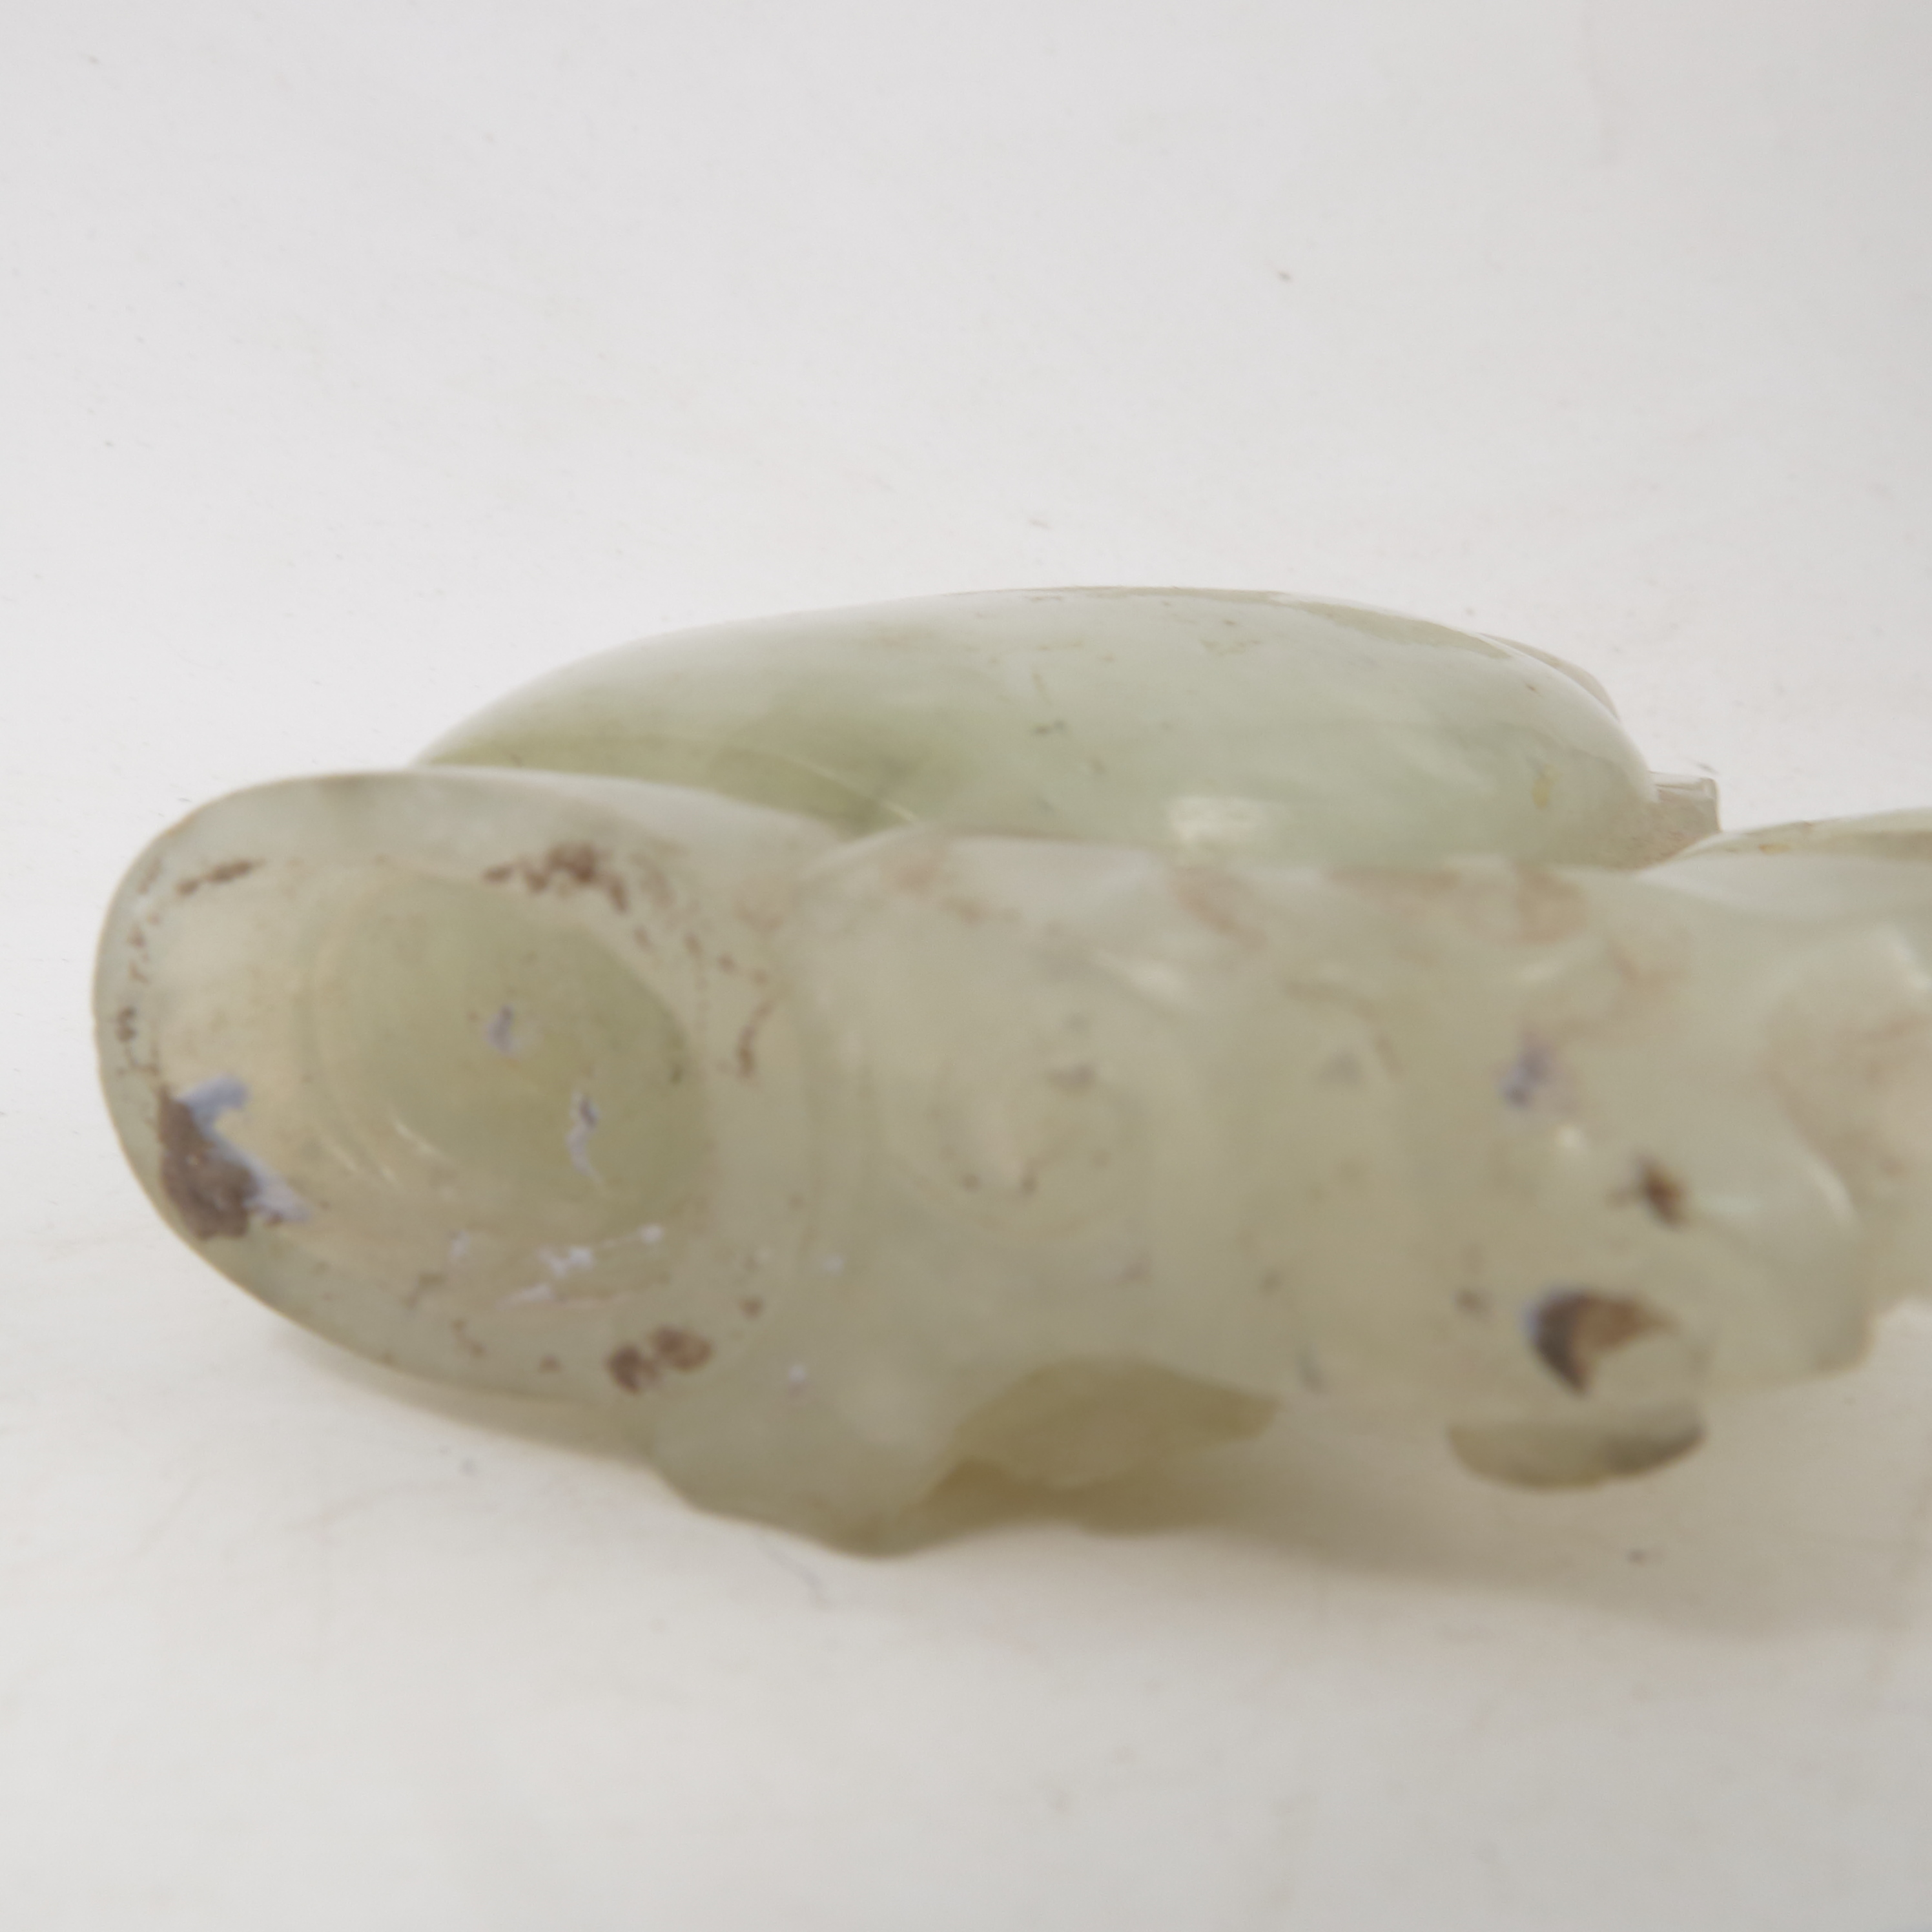 A carved hardstone vase, possibly white jade, of a stylized elephant and foliage, height 3. - Image 2 of 4